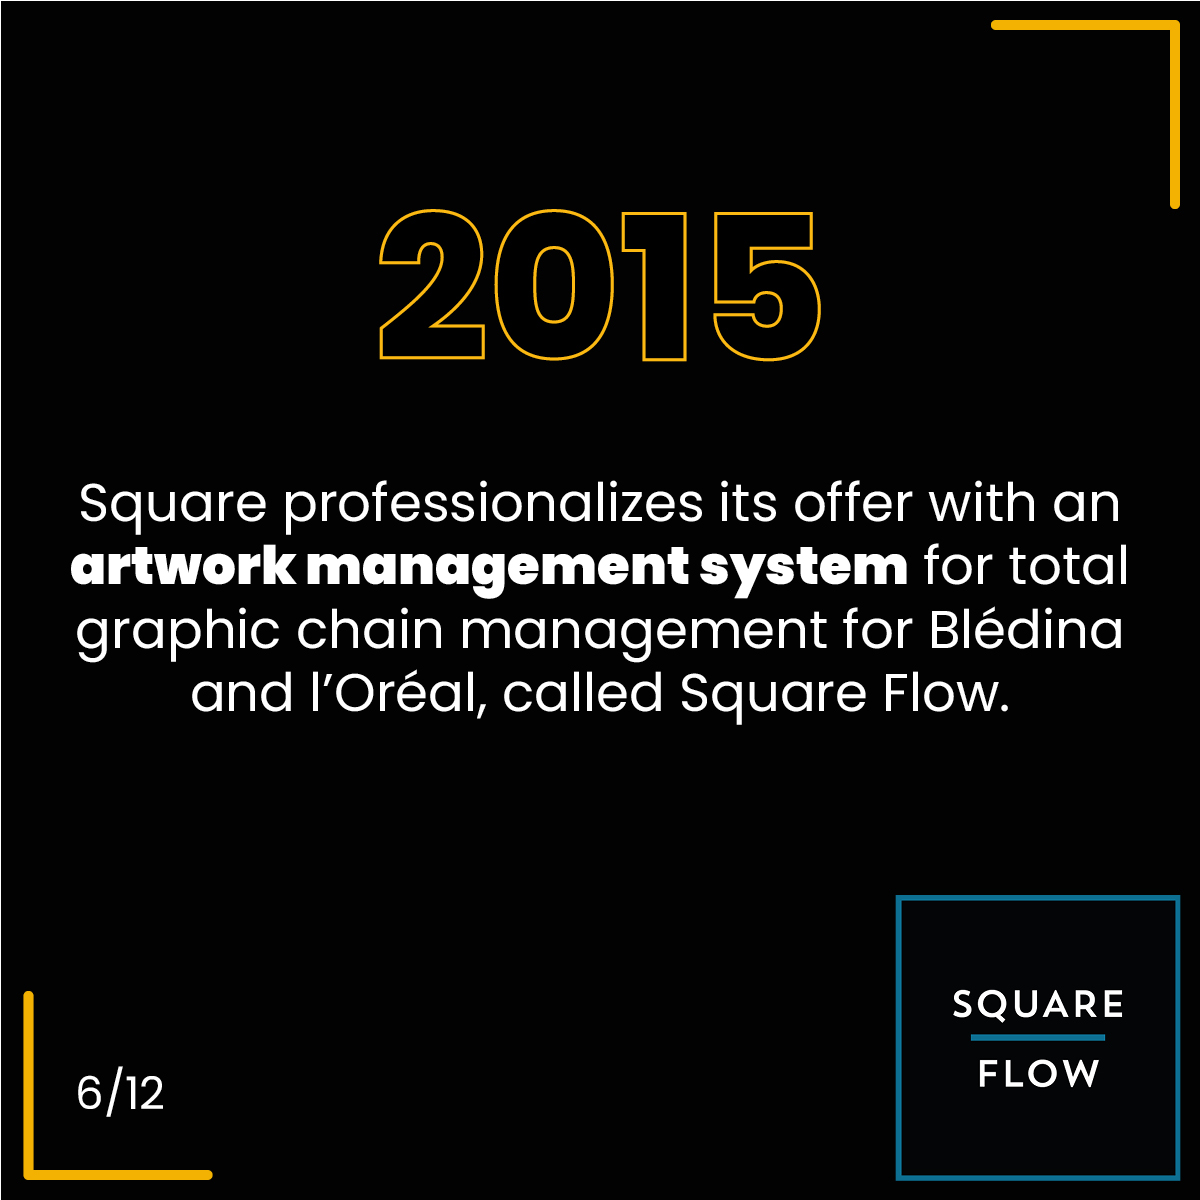 2015, Square professionalizes its offer with an artwork management system for total graphic chain management for Blédina and l’Oréal, called Square Flow.